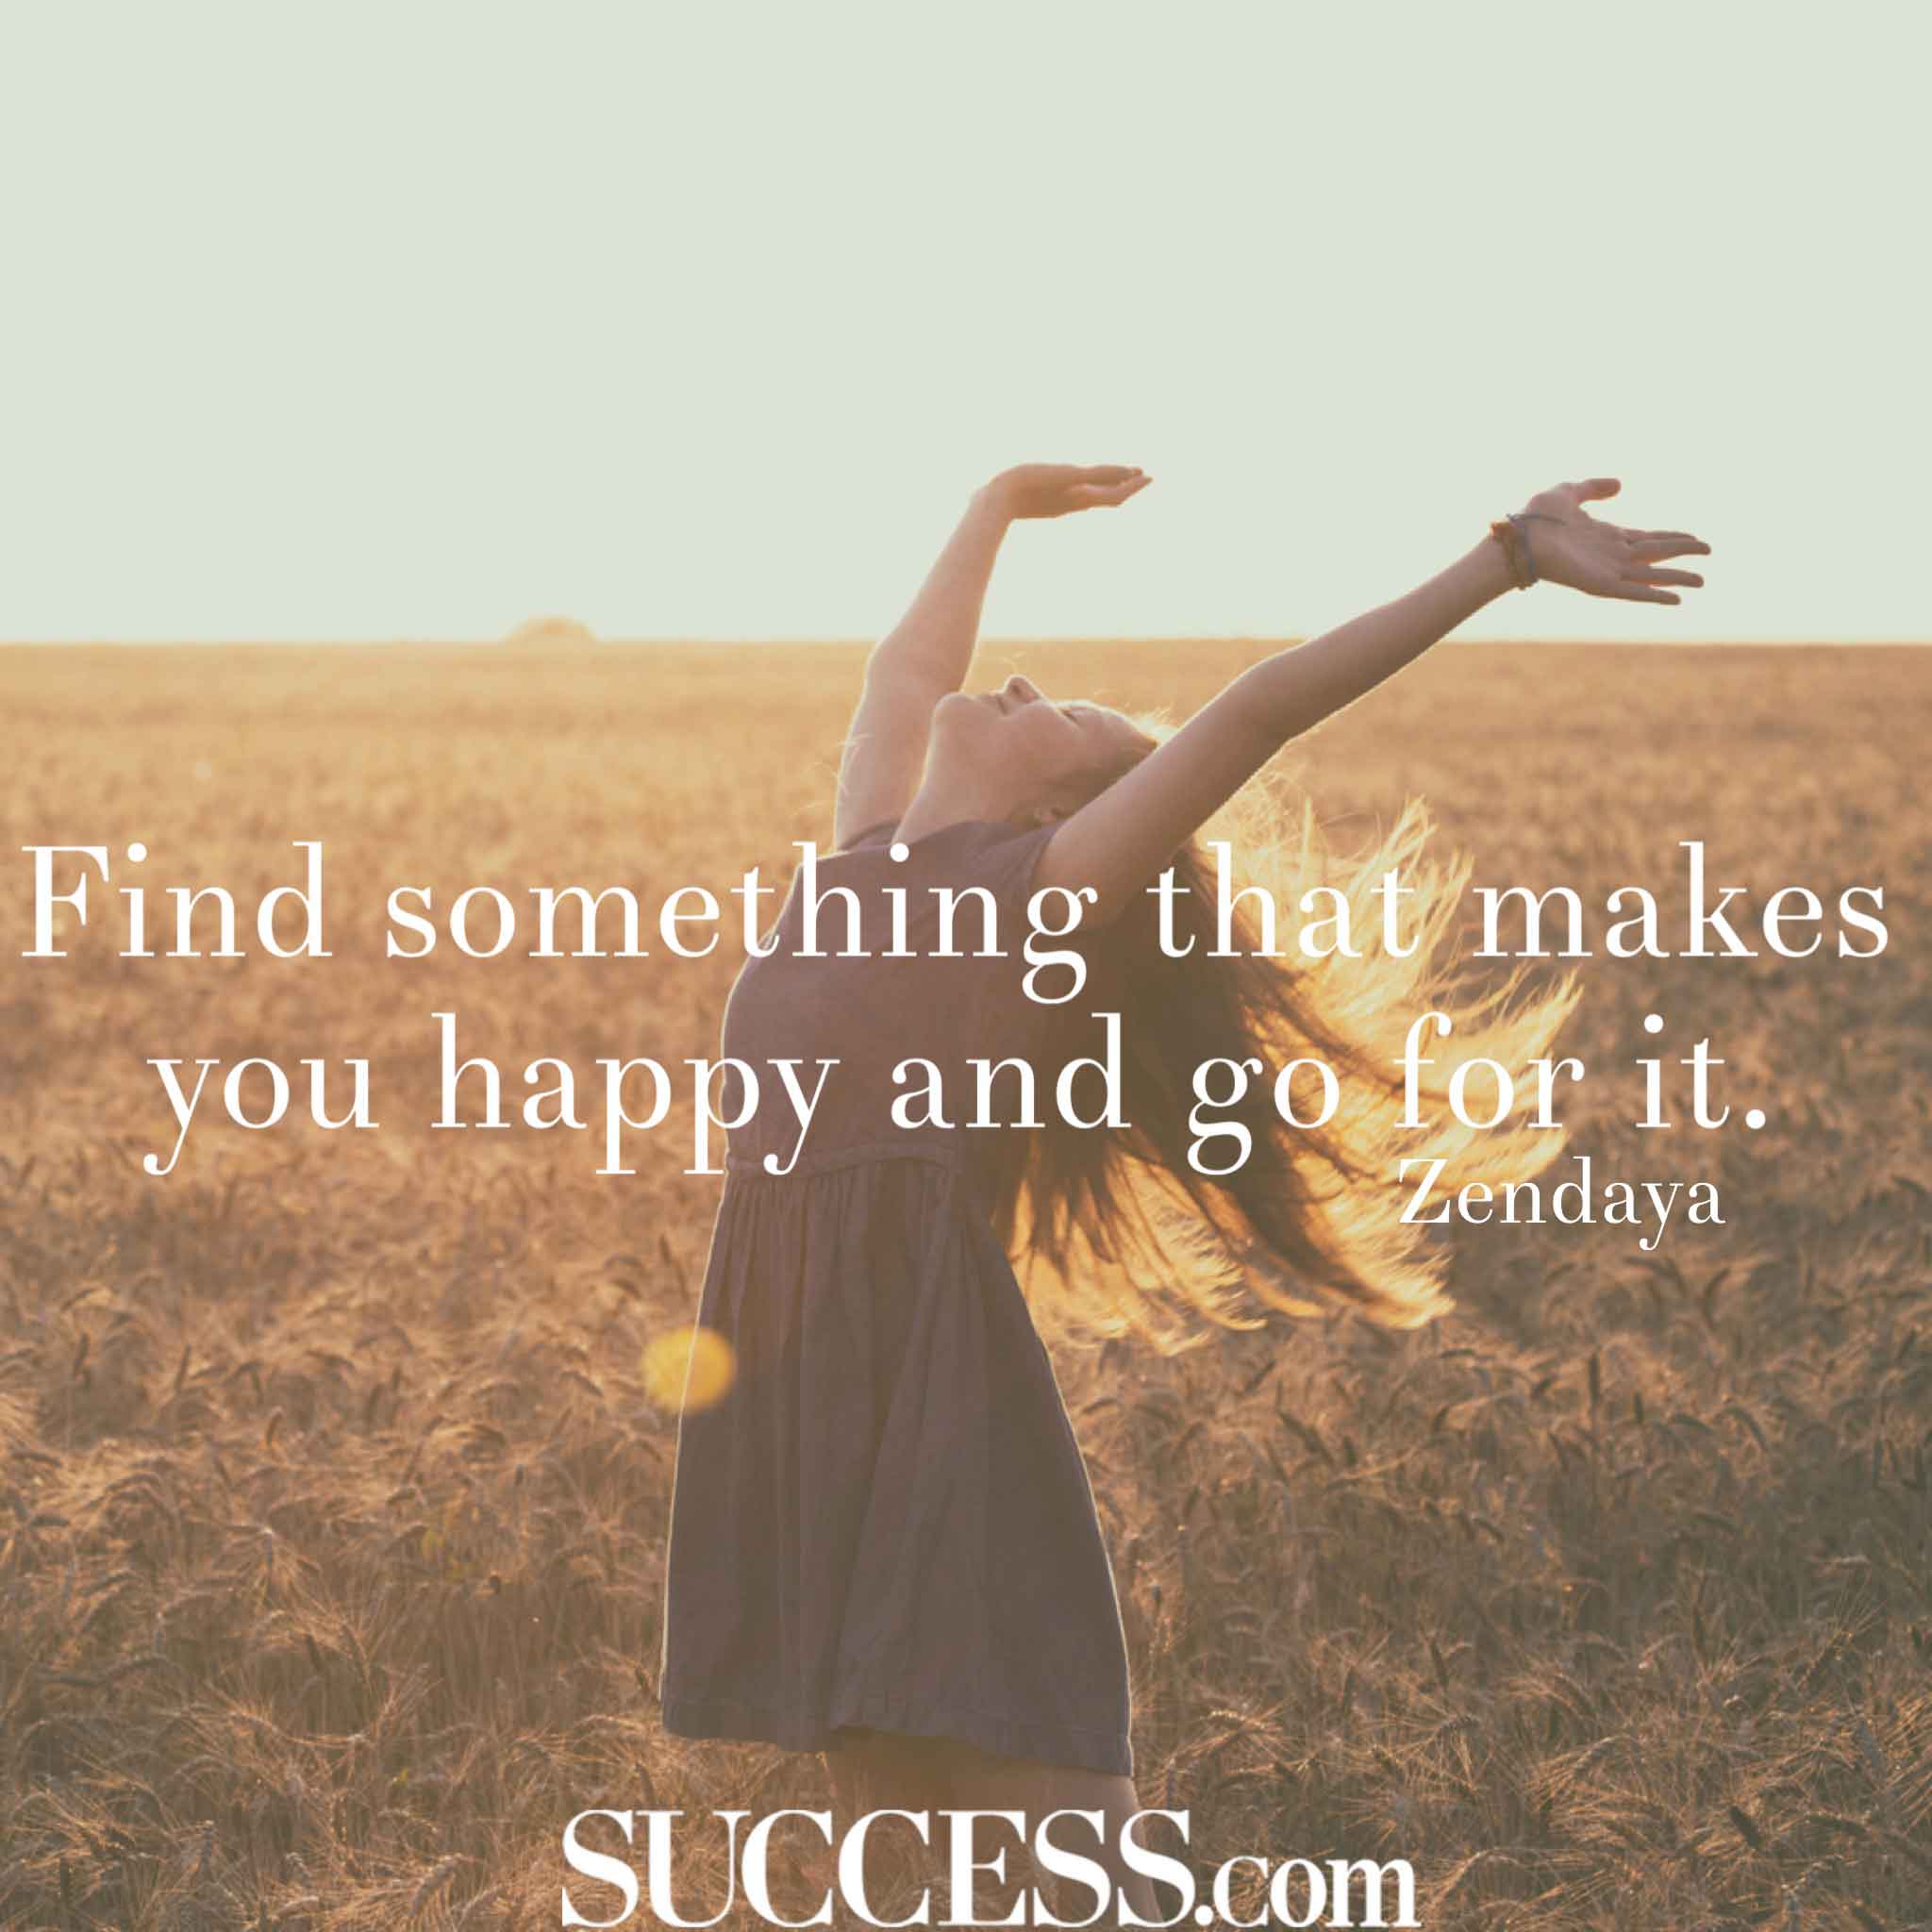 You’ve Got This! 15 Quotes for Getting What You Want